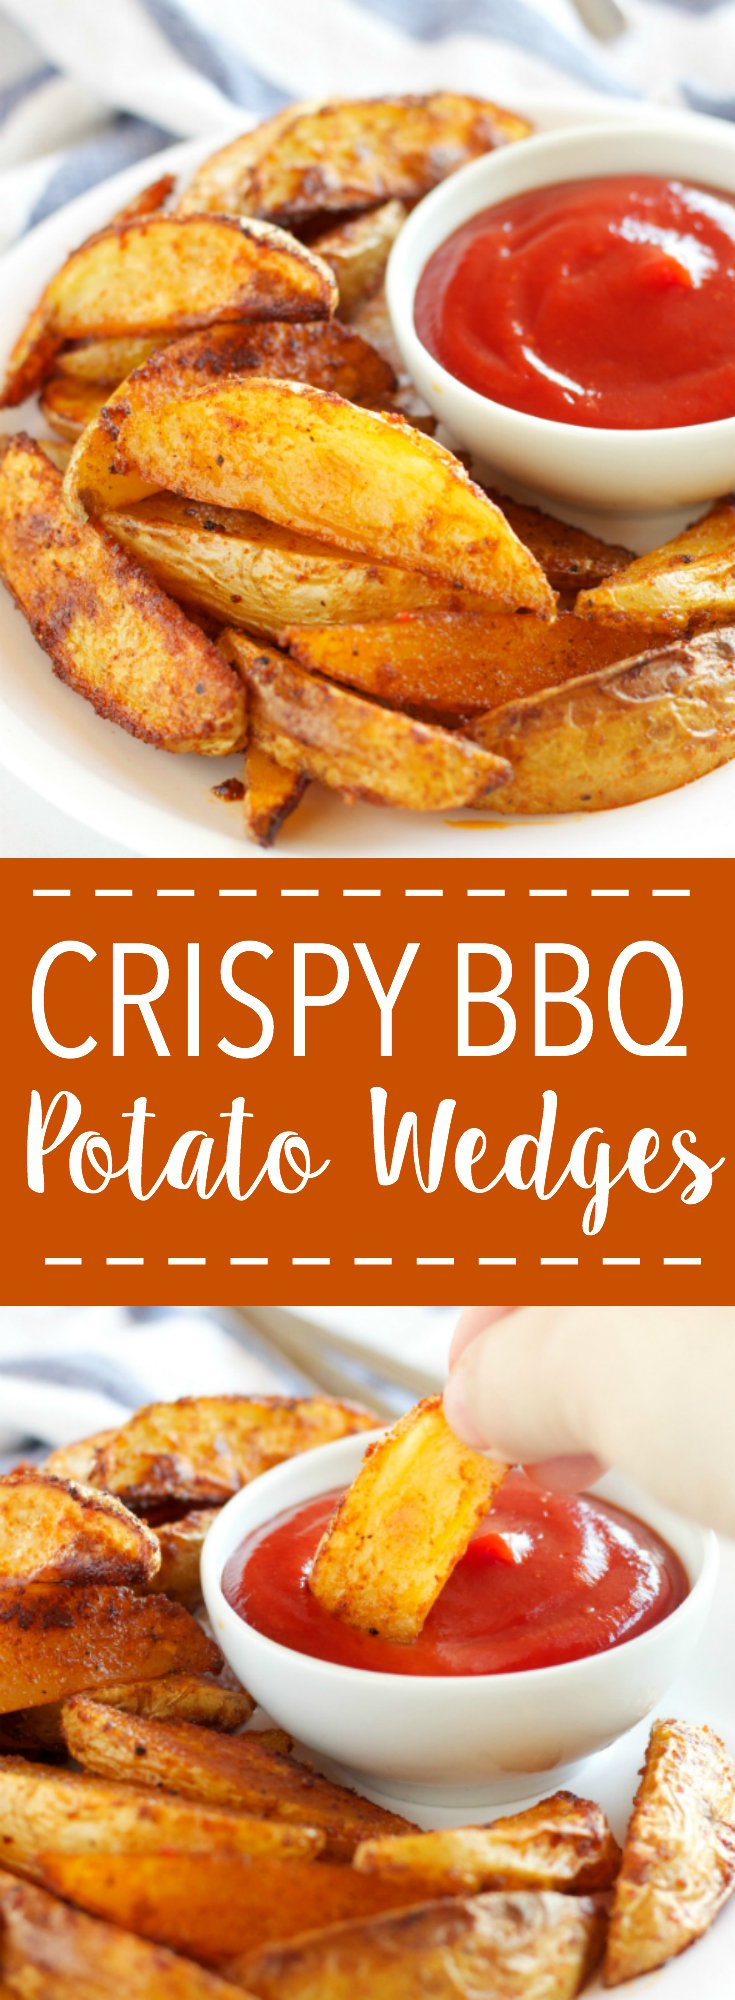 These Crispy Barbecue Potato Wedges are the perfect summer side dish - crispy on the outside and soft on the inside, with deliciously smoky BBQ flavor! Recipe from thebusybaker.ca! via @busybakerblog